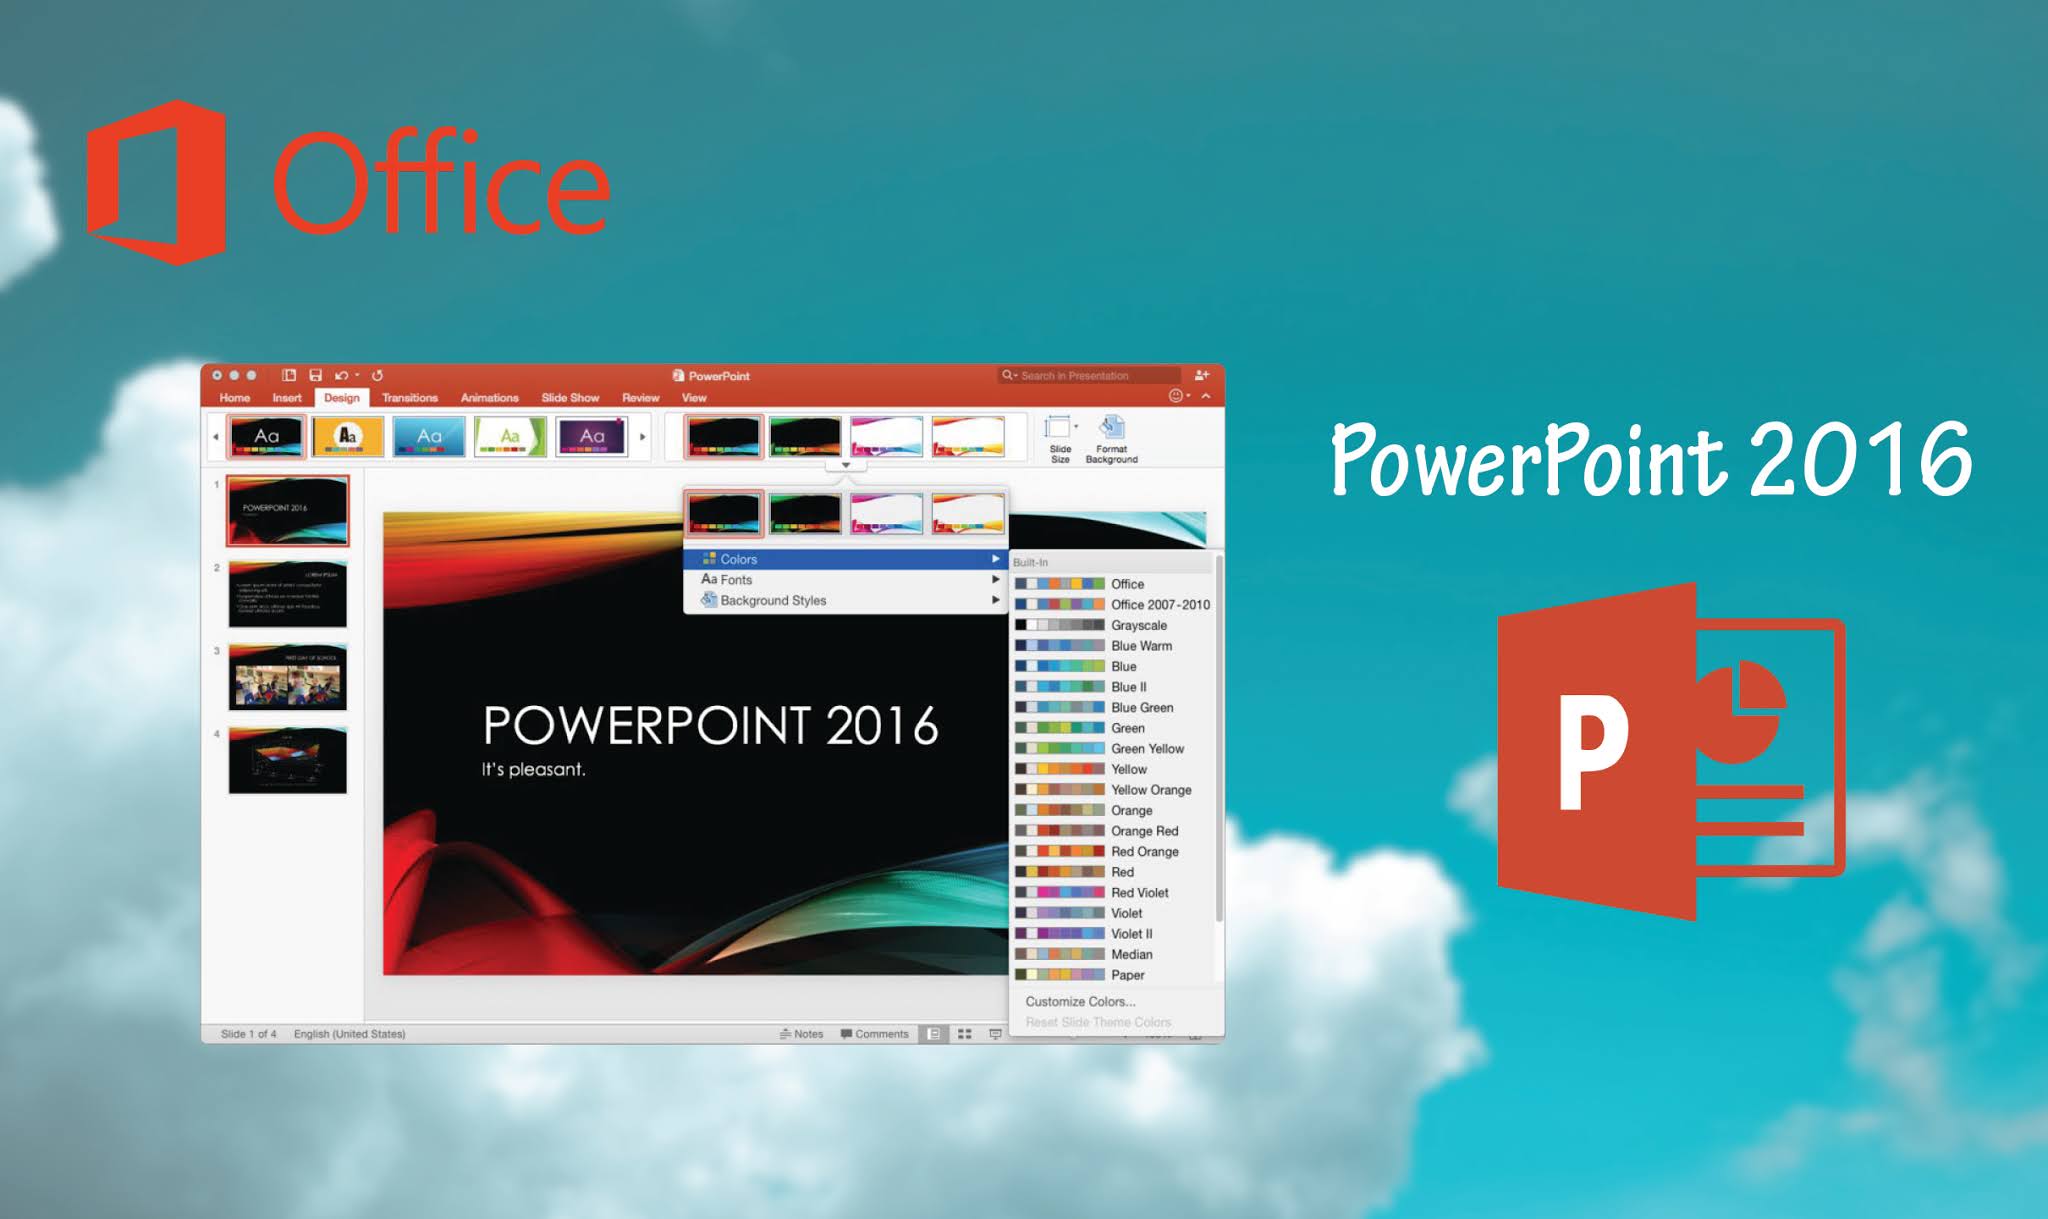 Share presentations with PowerPoint 2016